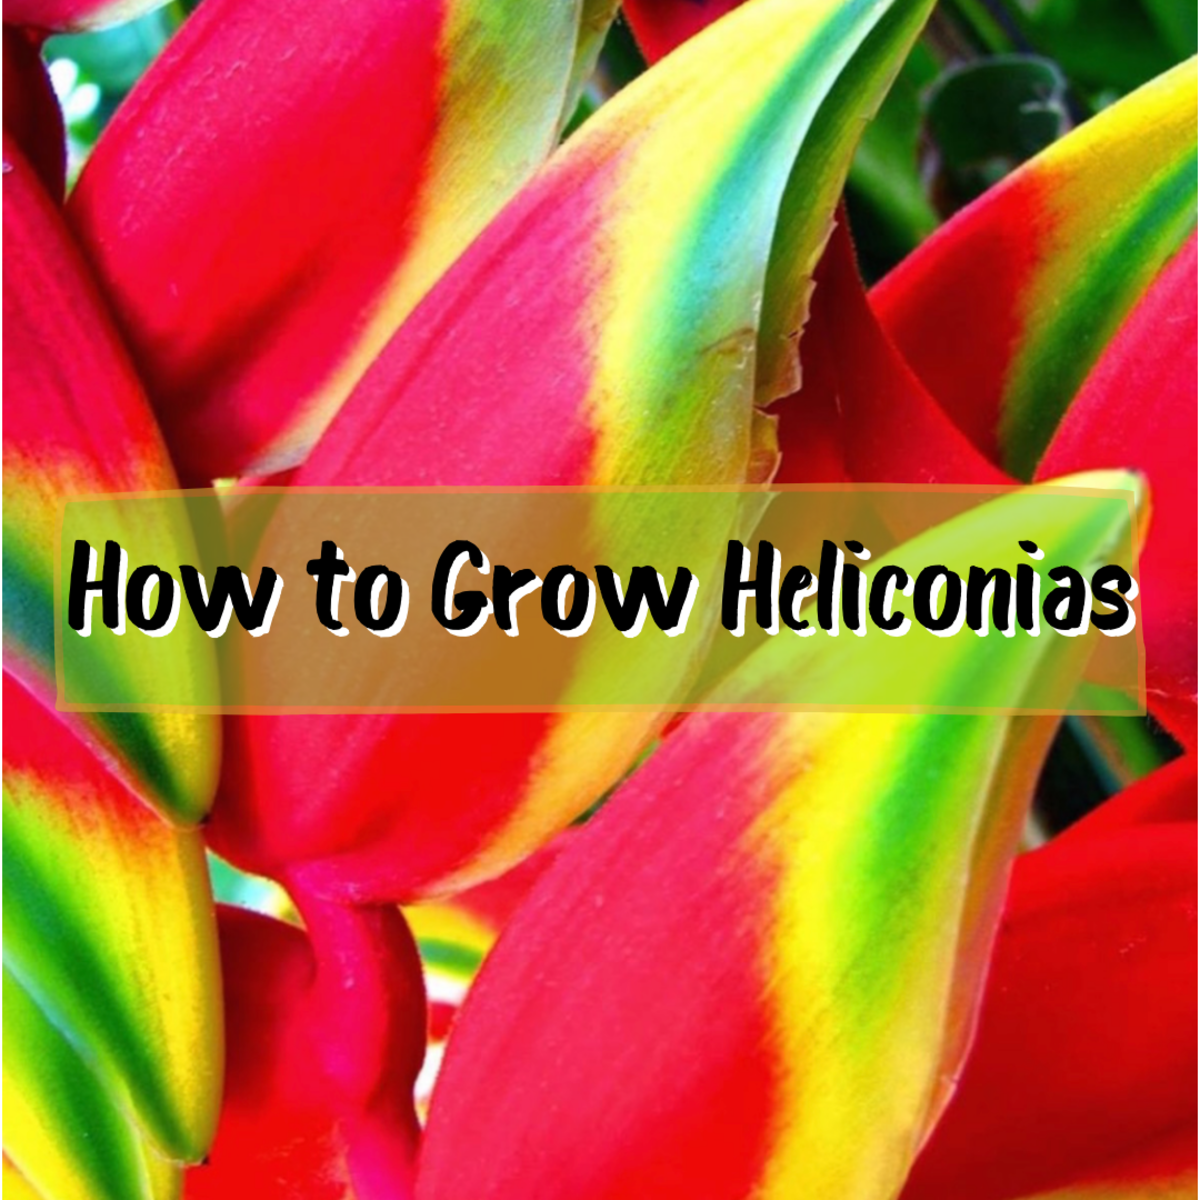 Read on to learn all about growing the perfect heliconias, the plant that completes any tropical garden. Pictured above is one of my favorite varieties, heliconia rostrata.